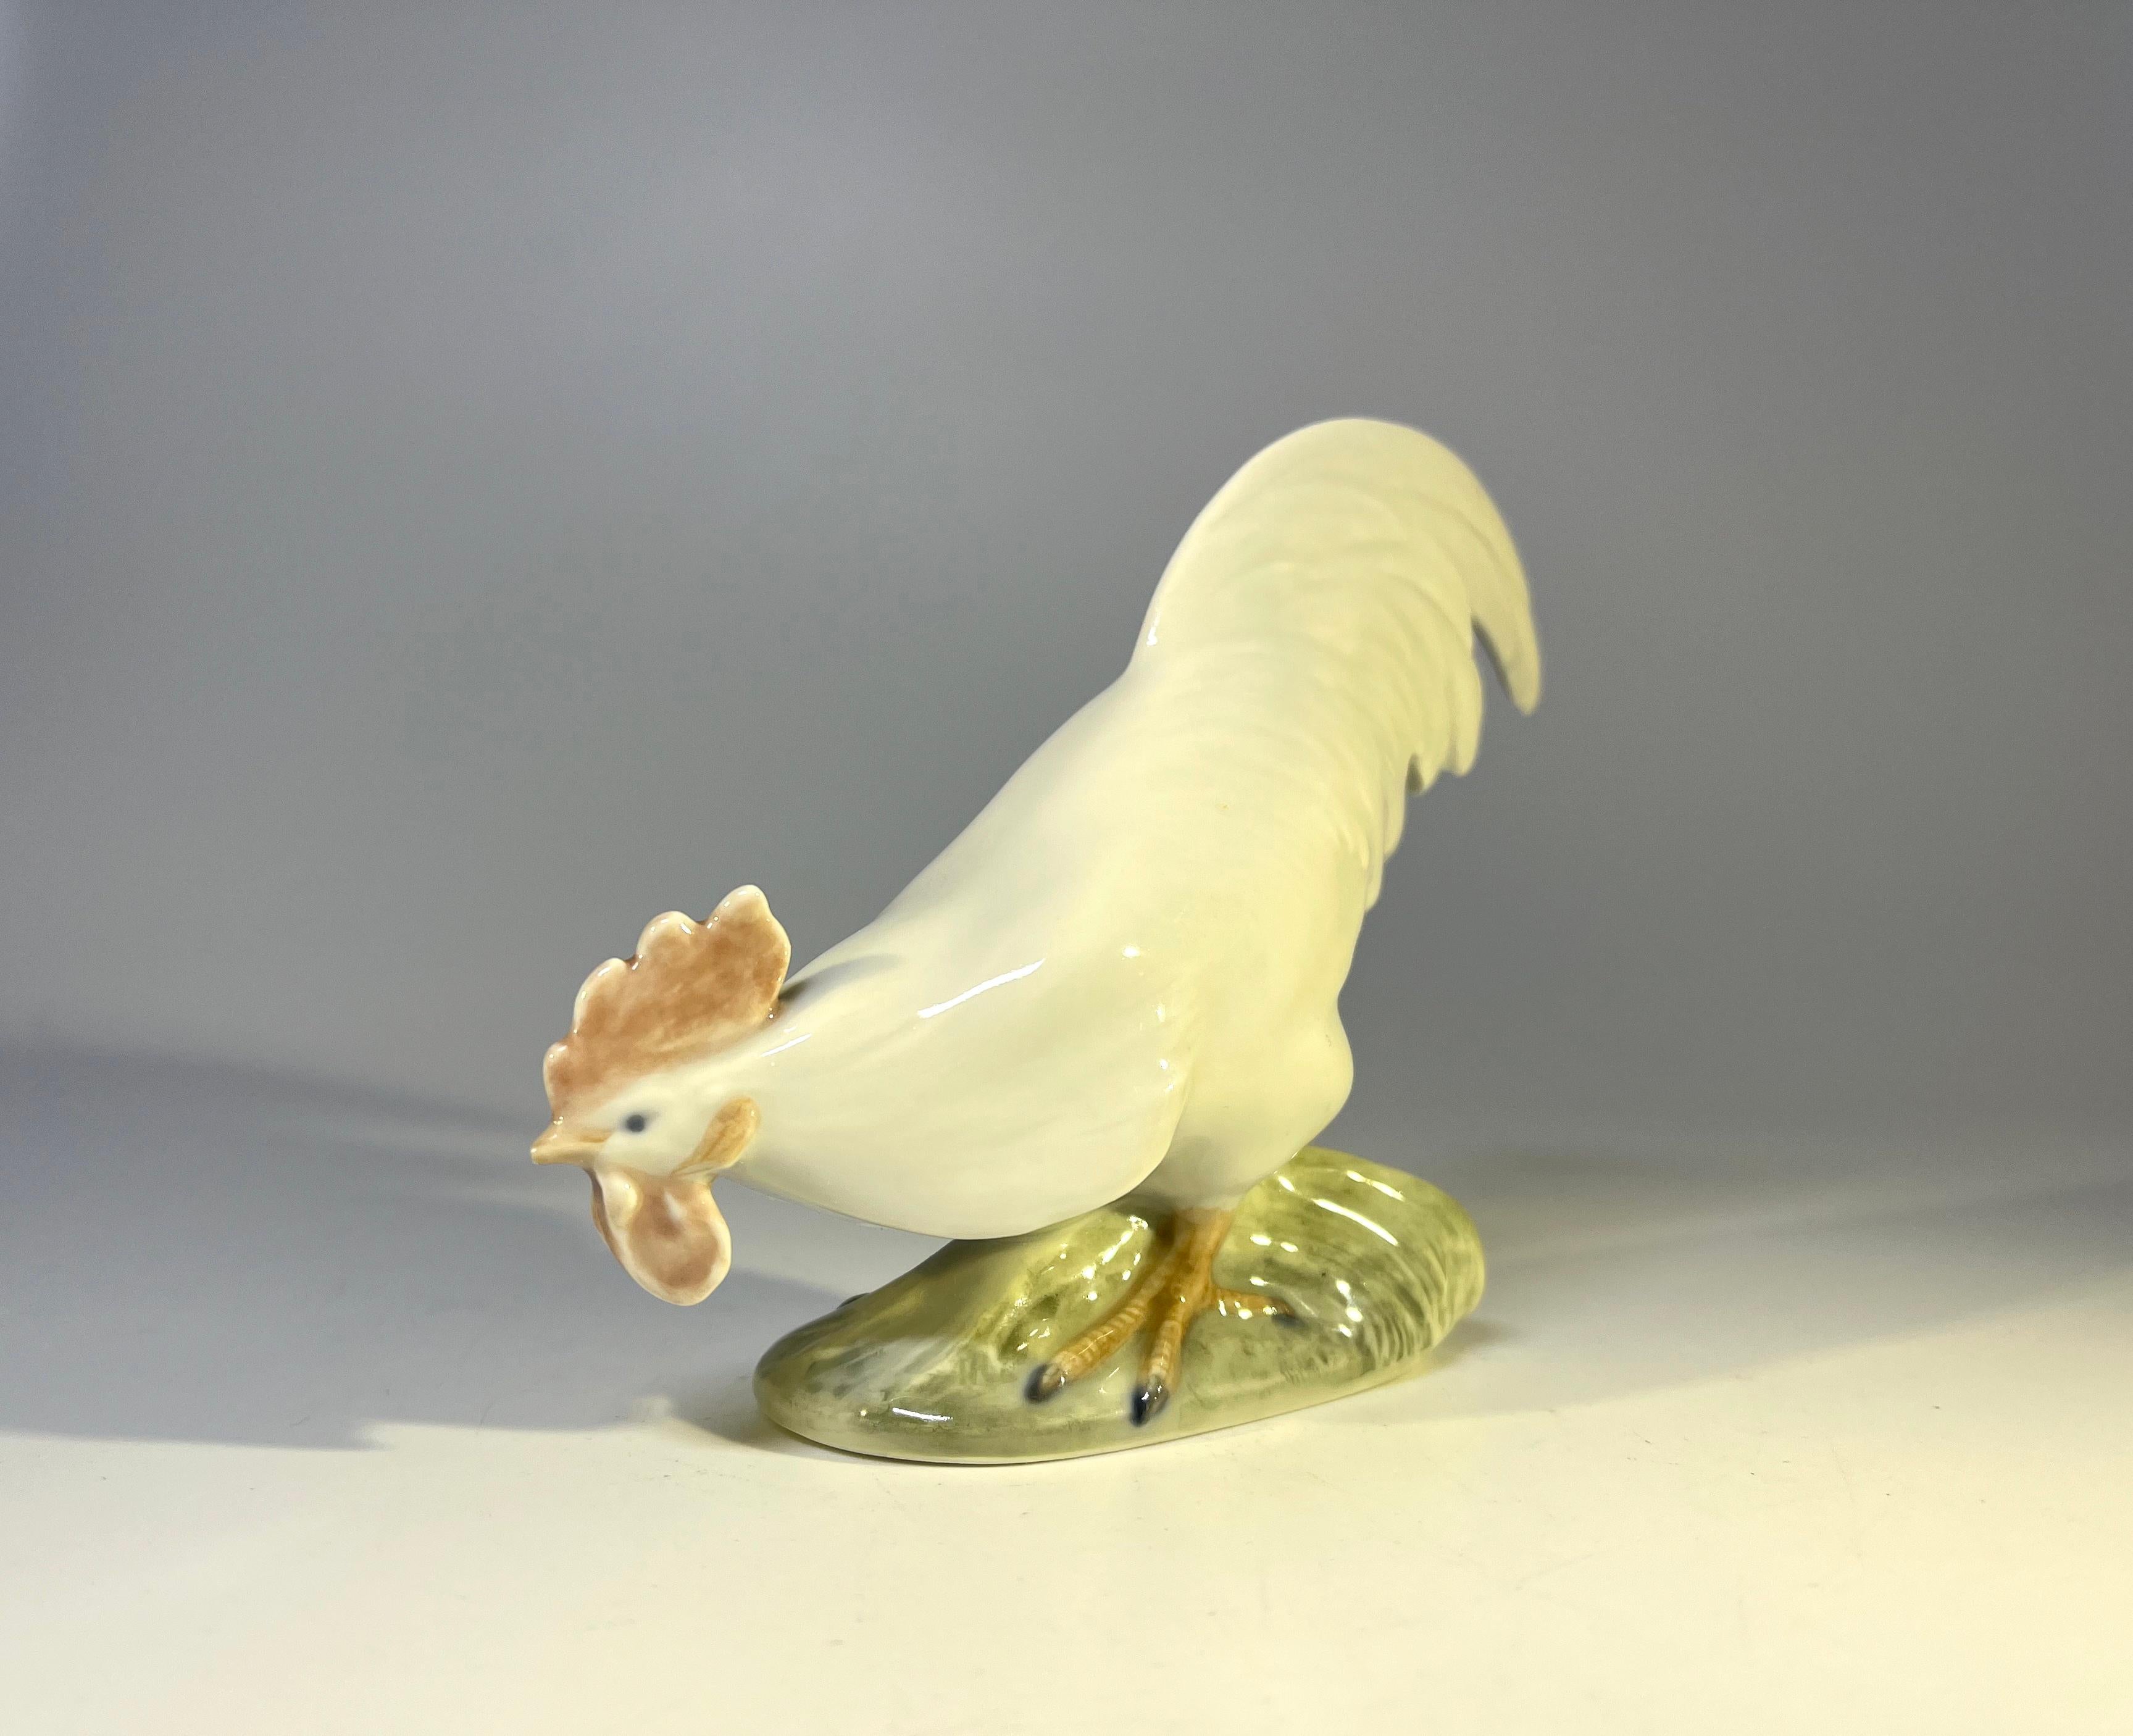 Christian Thomsen for Royal Copenhagen porcelain foraging cockerel figurine. 
Created in 1923, a classic collectible piece
Signed and Numbered 1127
circa 1923
Measures: height 4 inch, width 5 inch, depth 1.5 inch
In excellent condition.